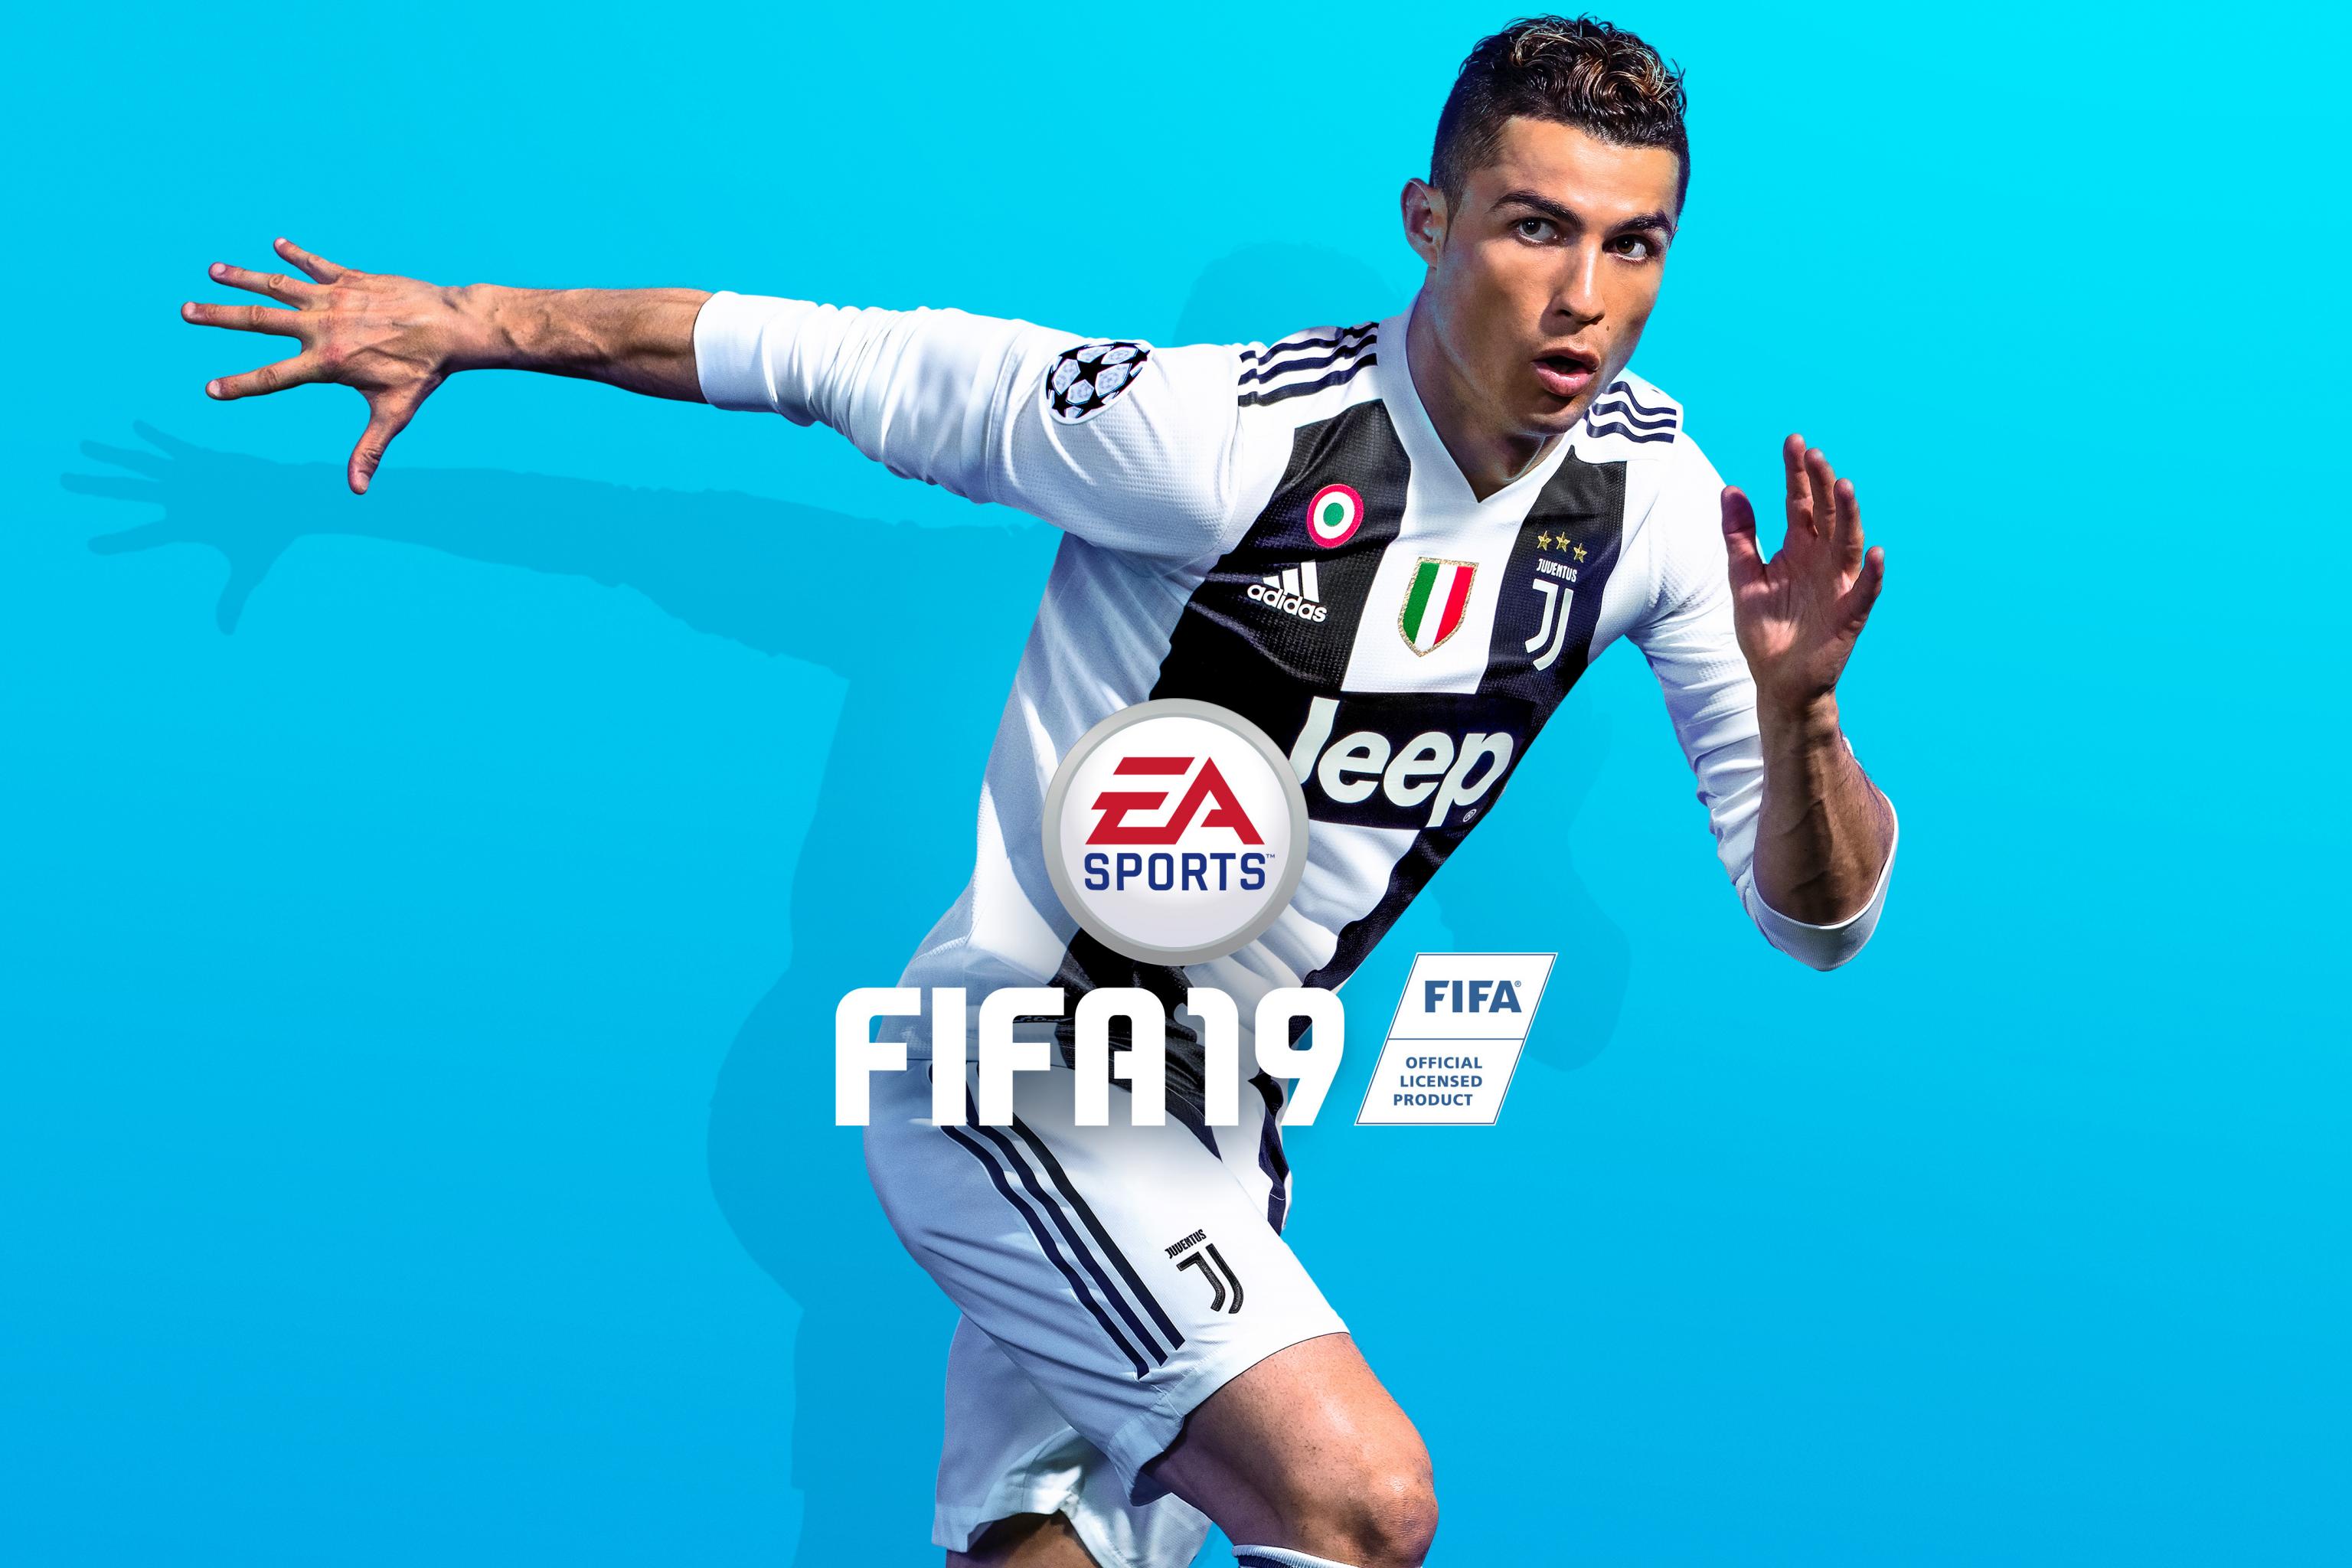 New Fifa 19 Cover Features Cristiano Ronaldo In Juventus Kit Bleacher Report Latest News Videos And Highlights